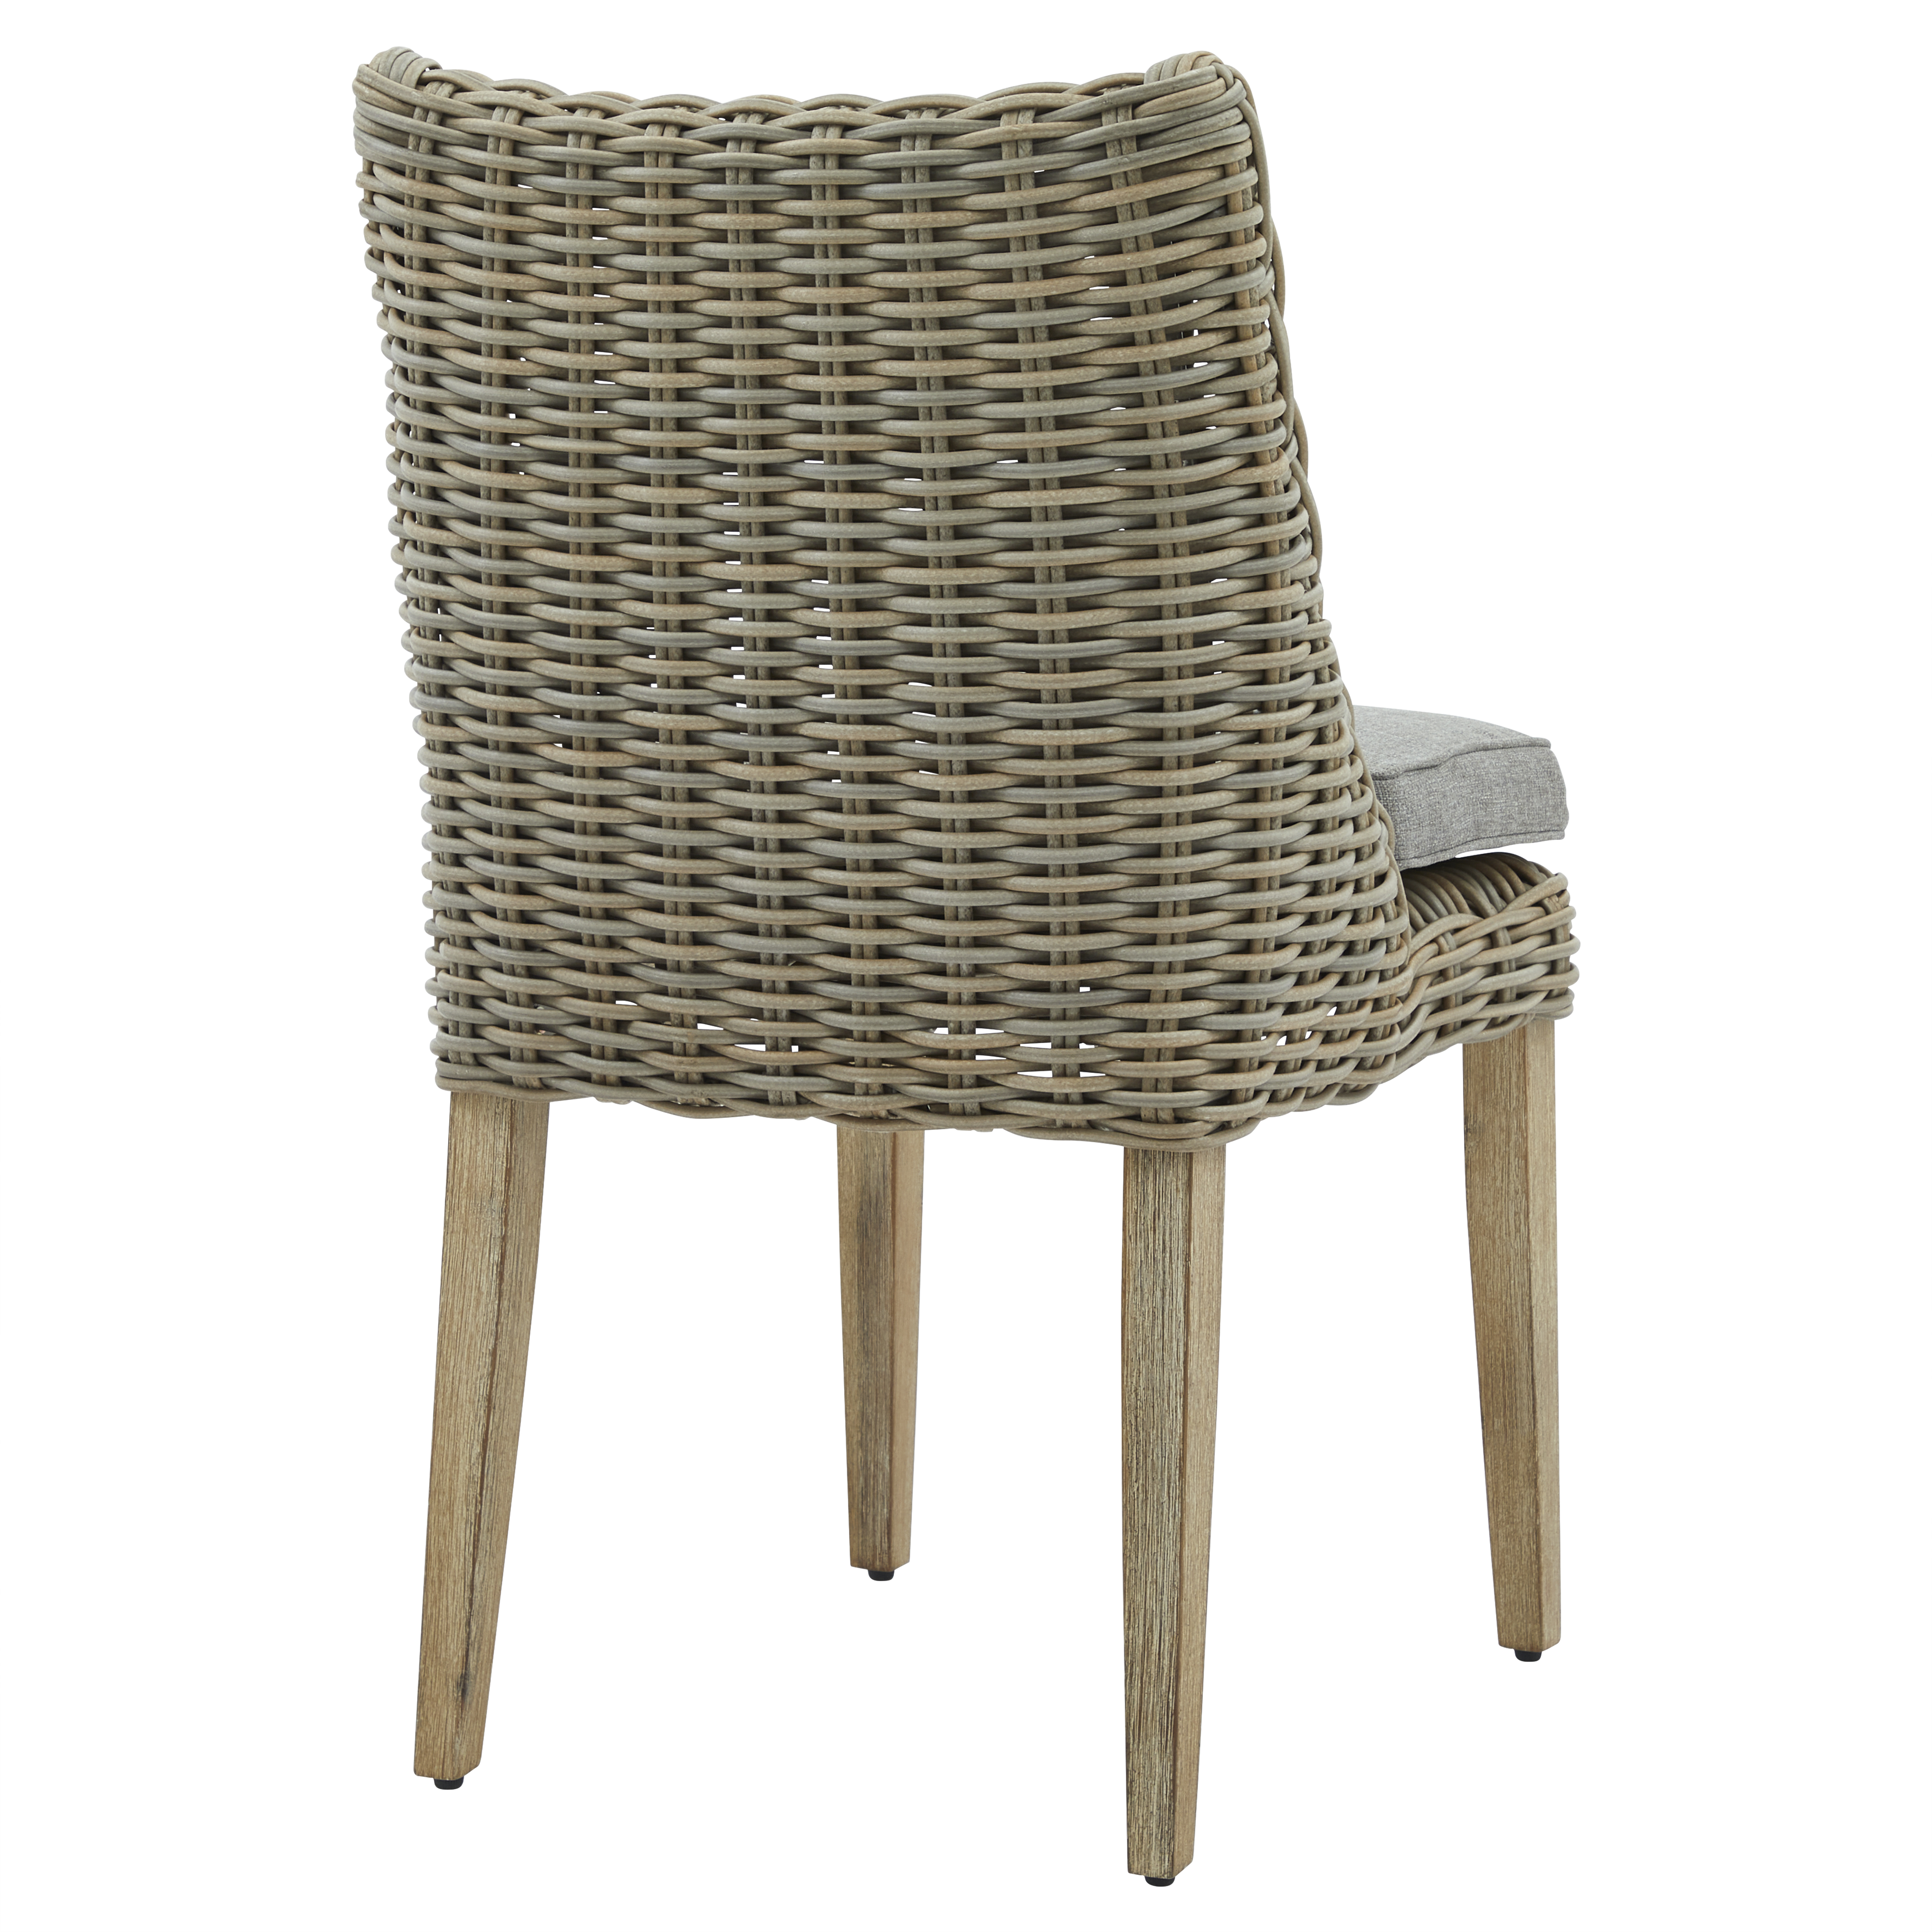 Capri Collection Outdoor Round Dining Chair - Image 3